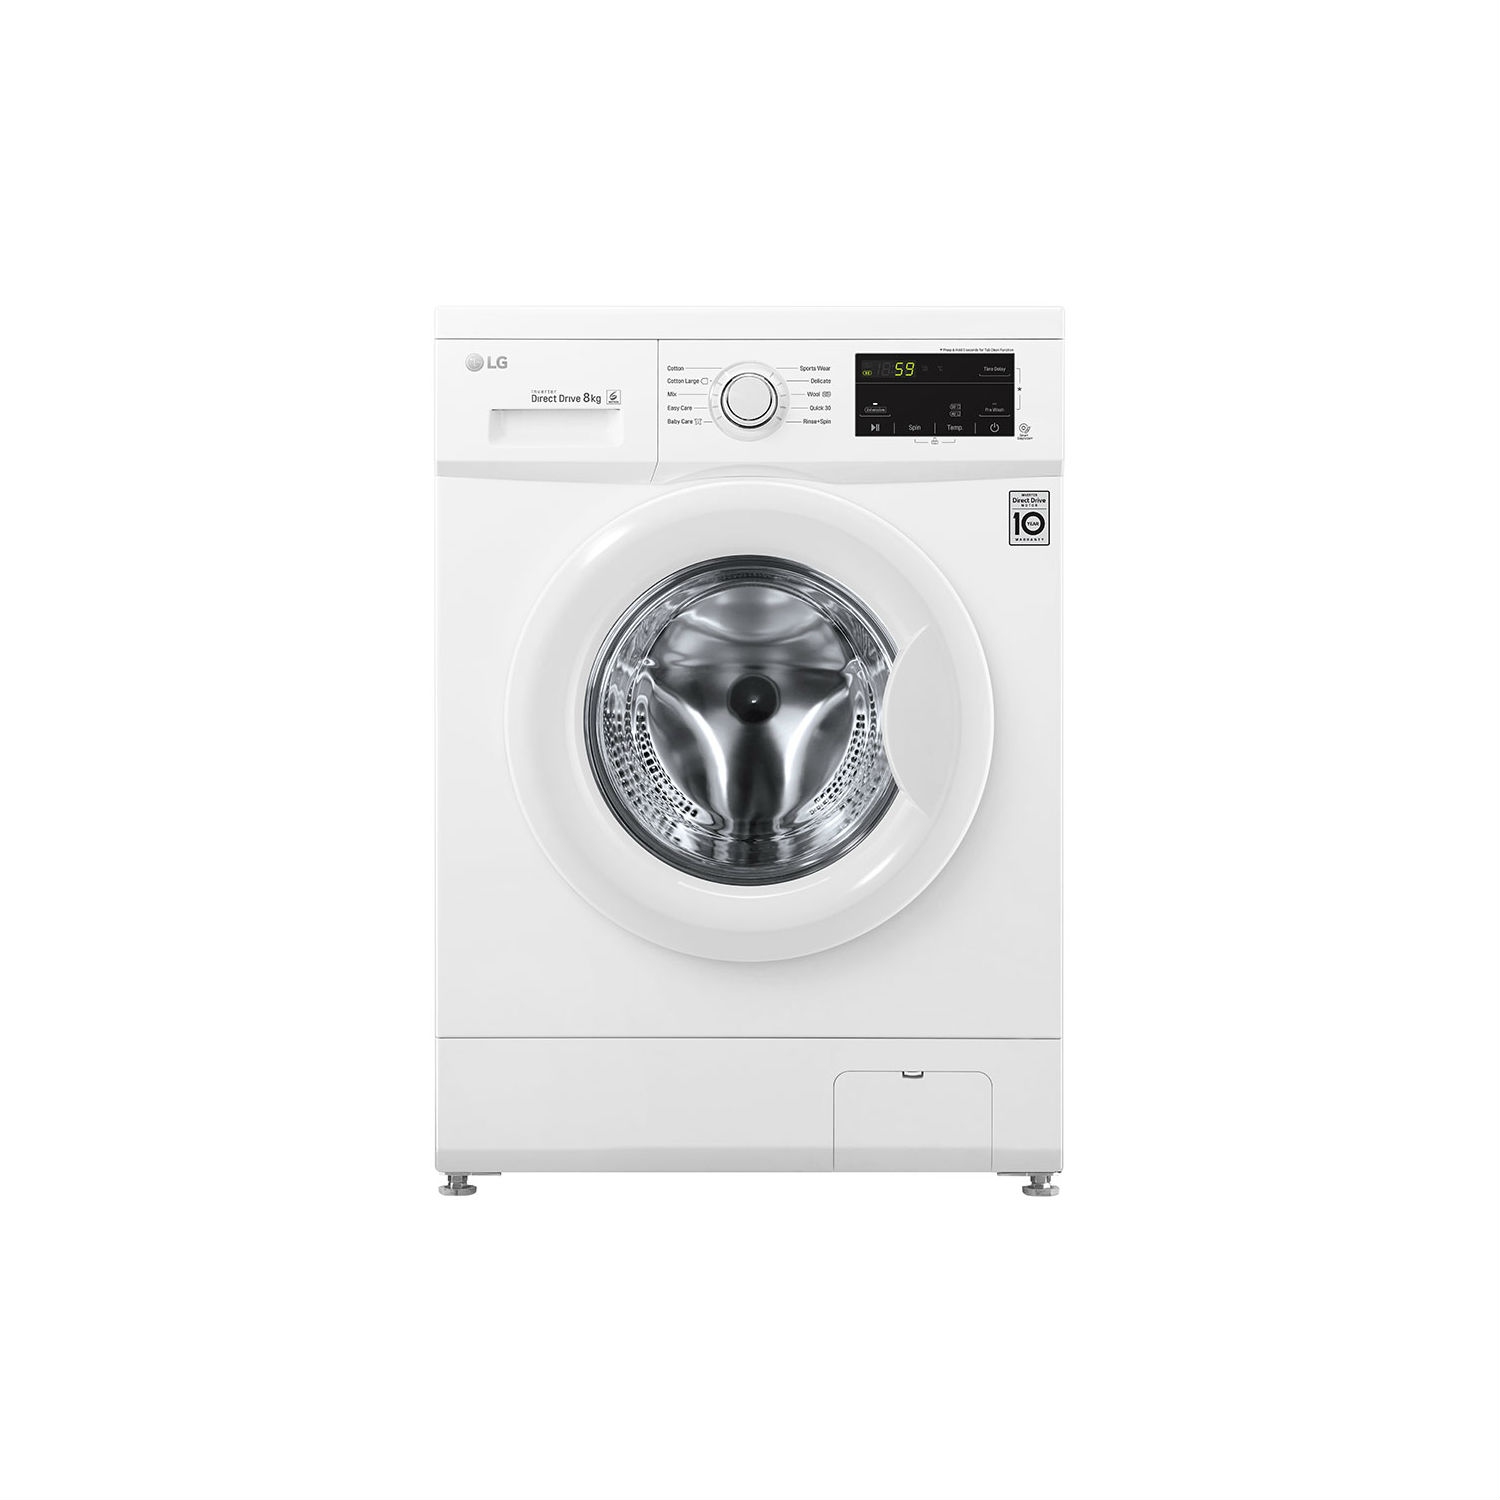 LG ELECTRONICS 8 kg 1400 Inverter Direct Drive Washing Machine - WHITE - A+++-30% Energy Rated - 0